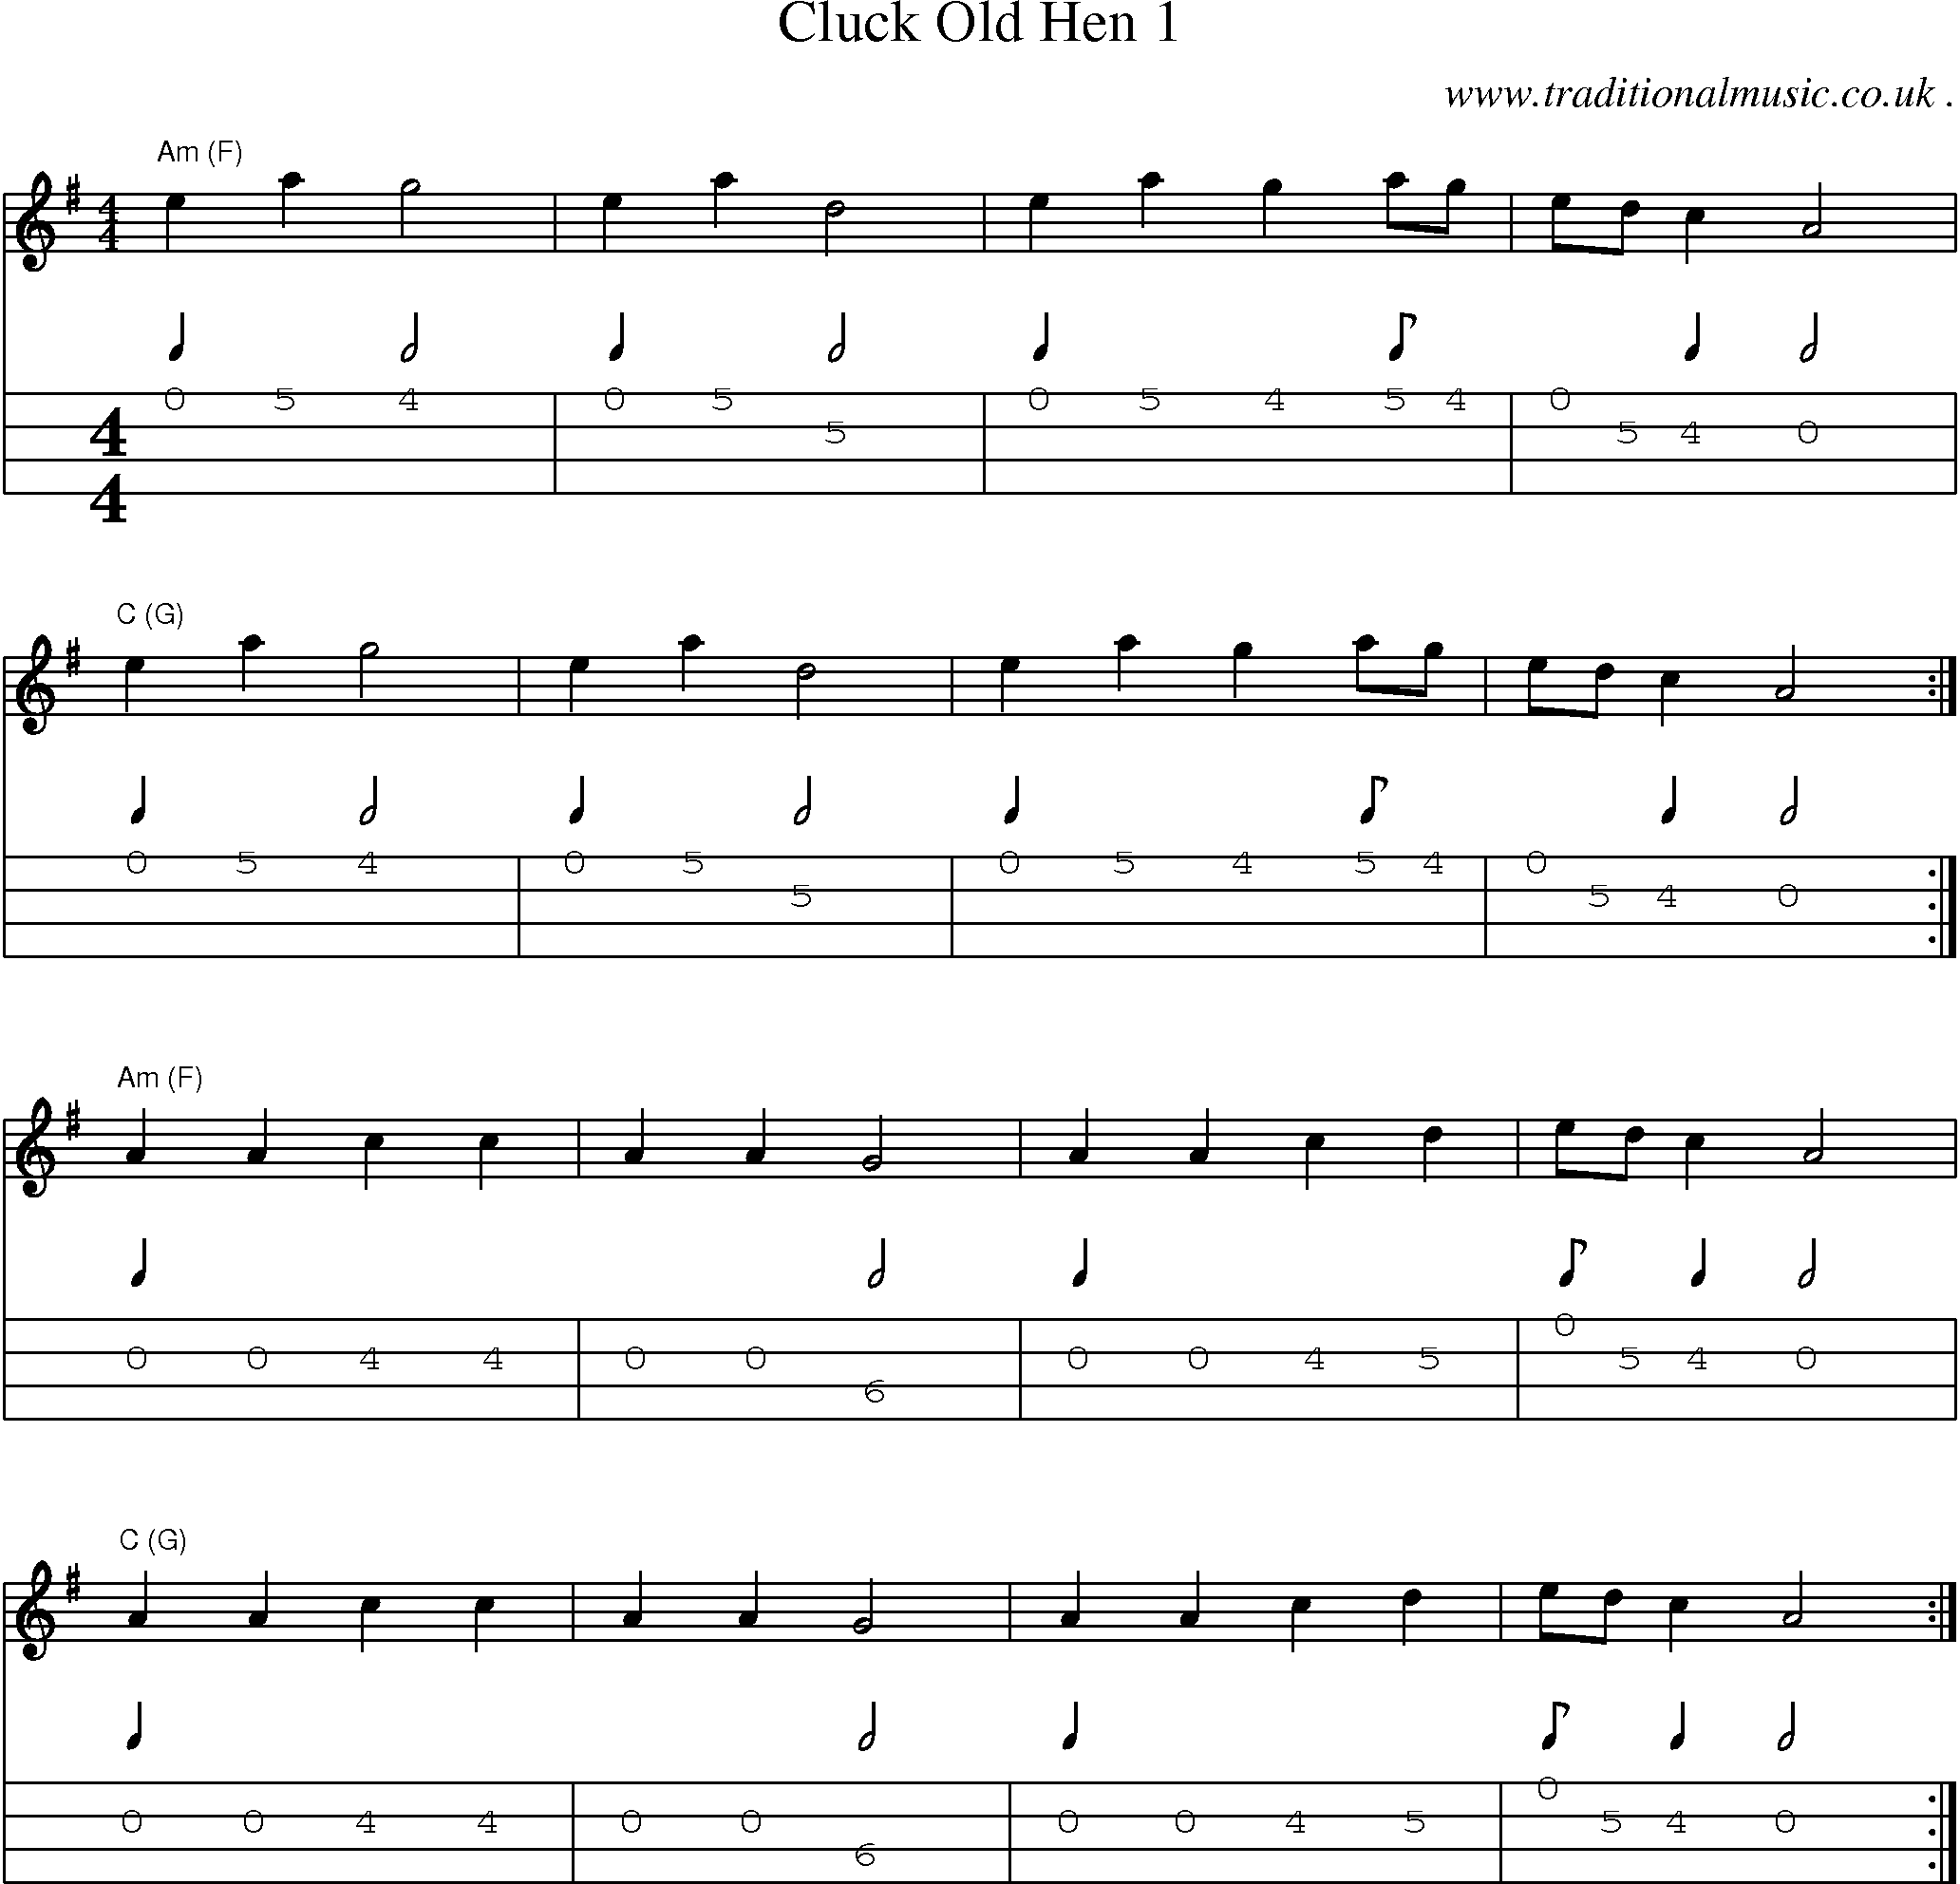 Music Score and Mandolin Tabs for Cluck Old Hen 1